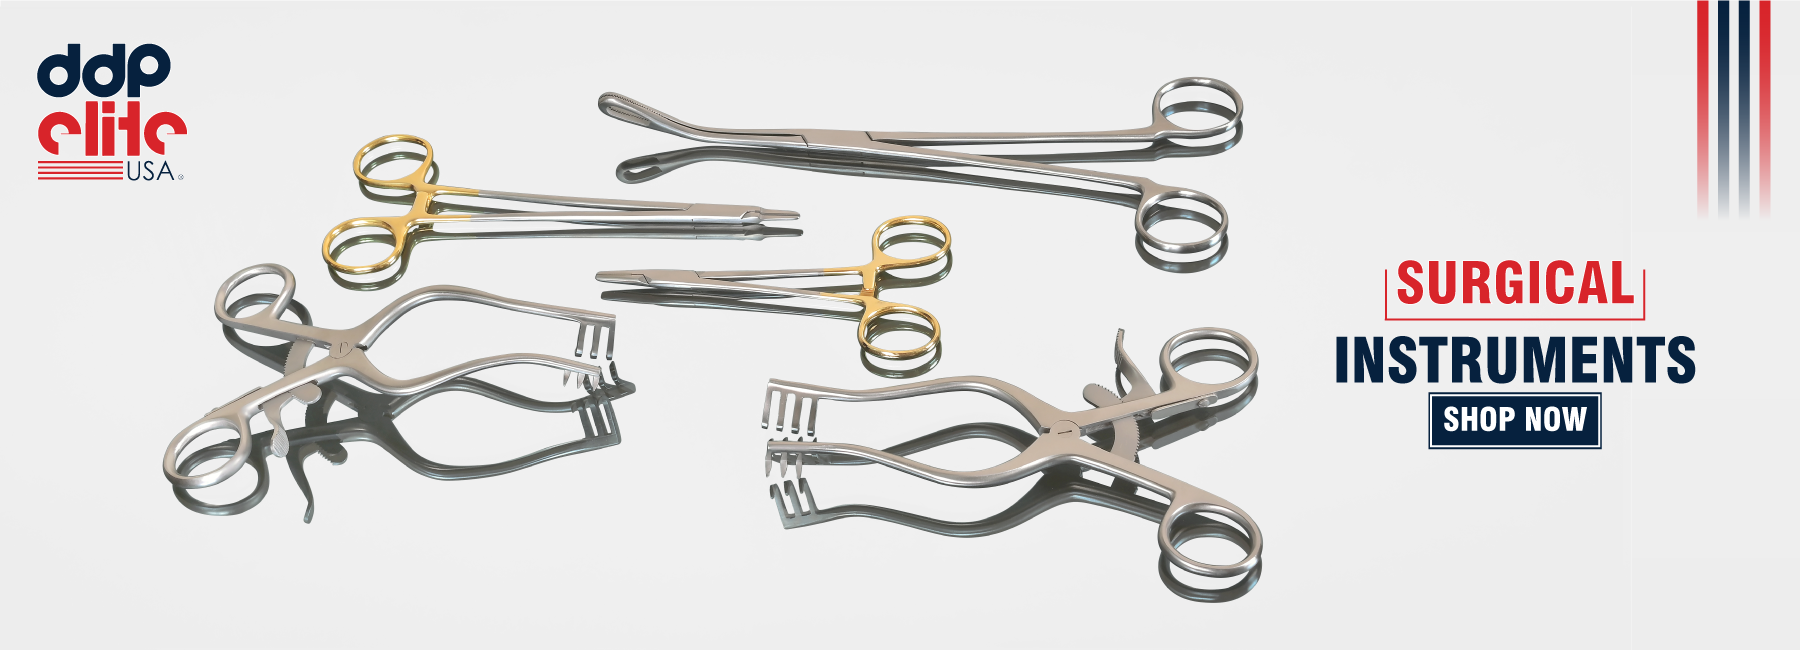 surgical_instruments